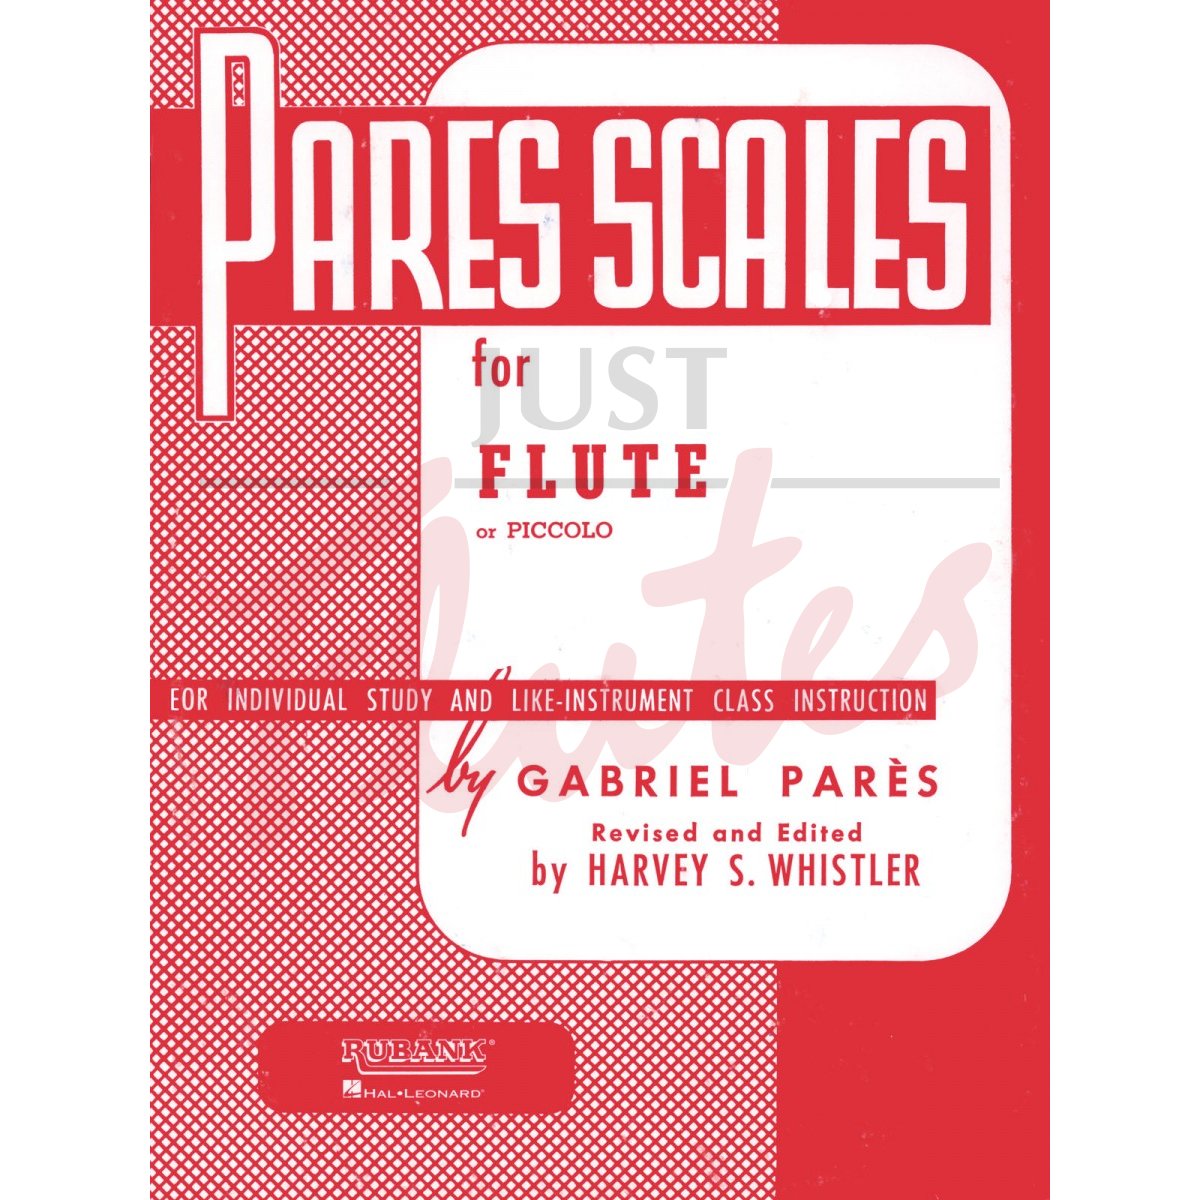 Scales for Piccolo or Flute